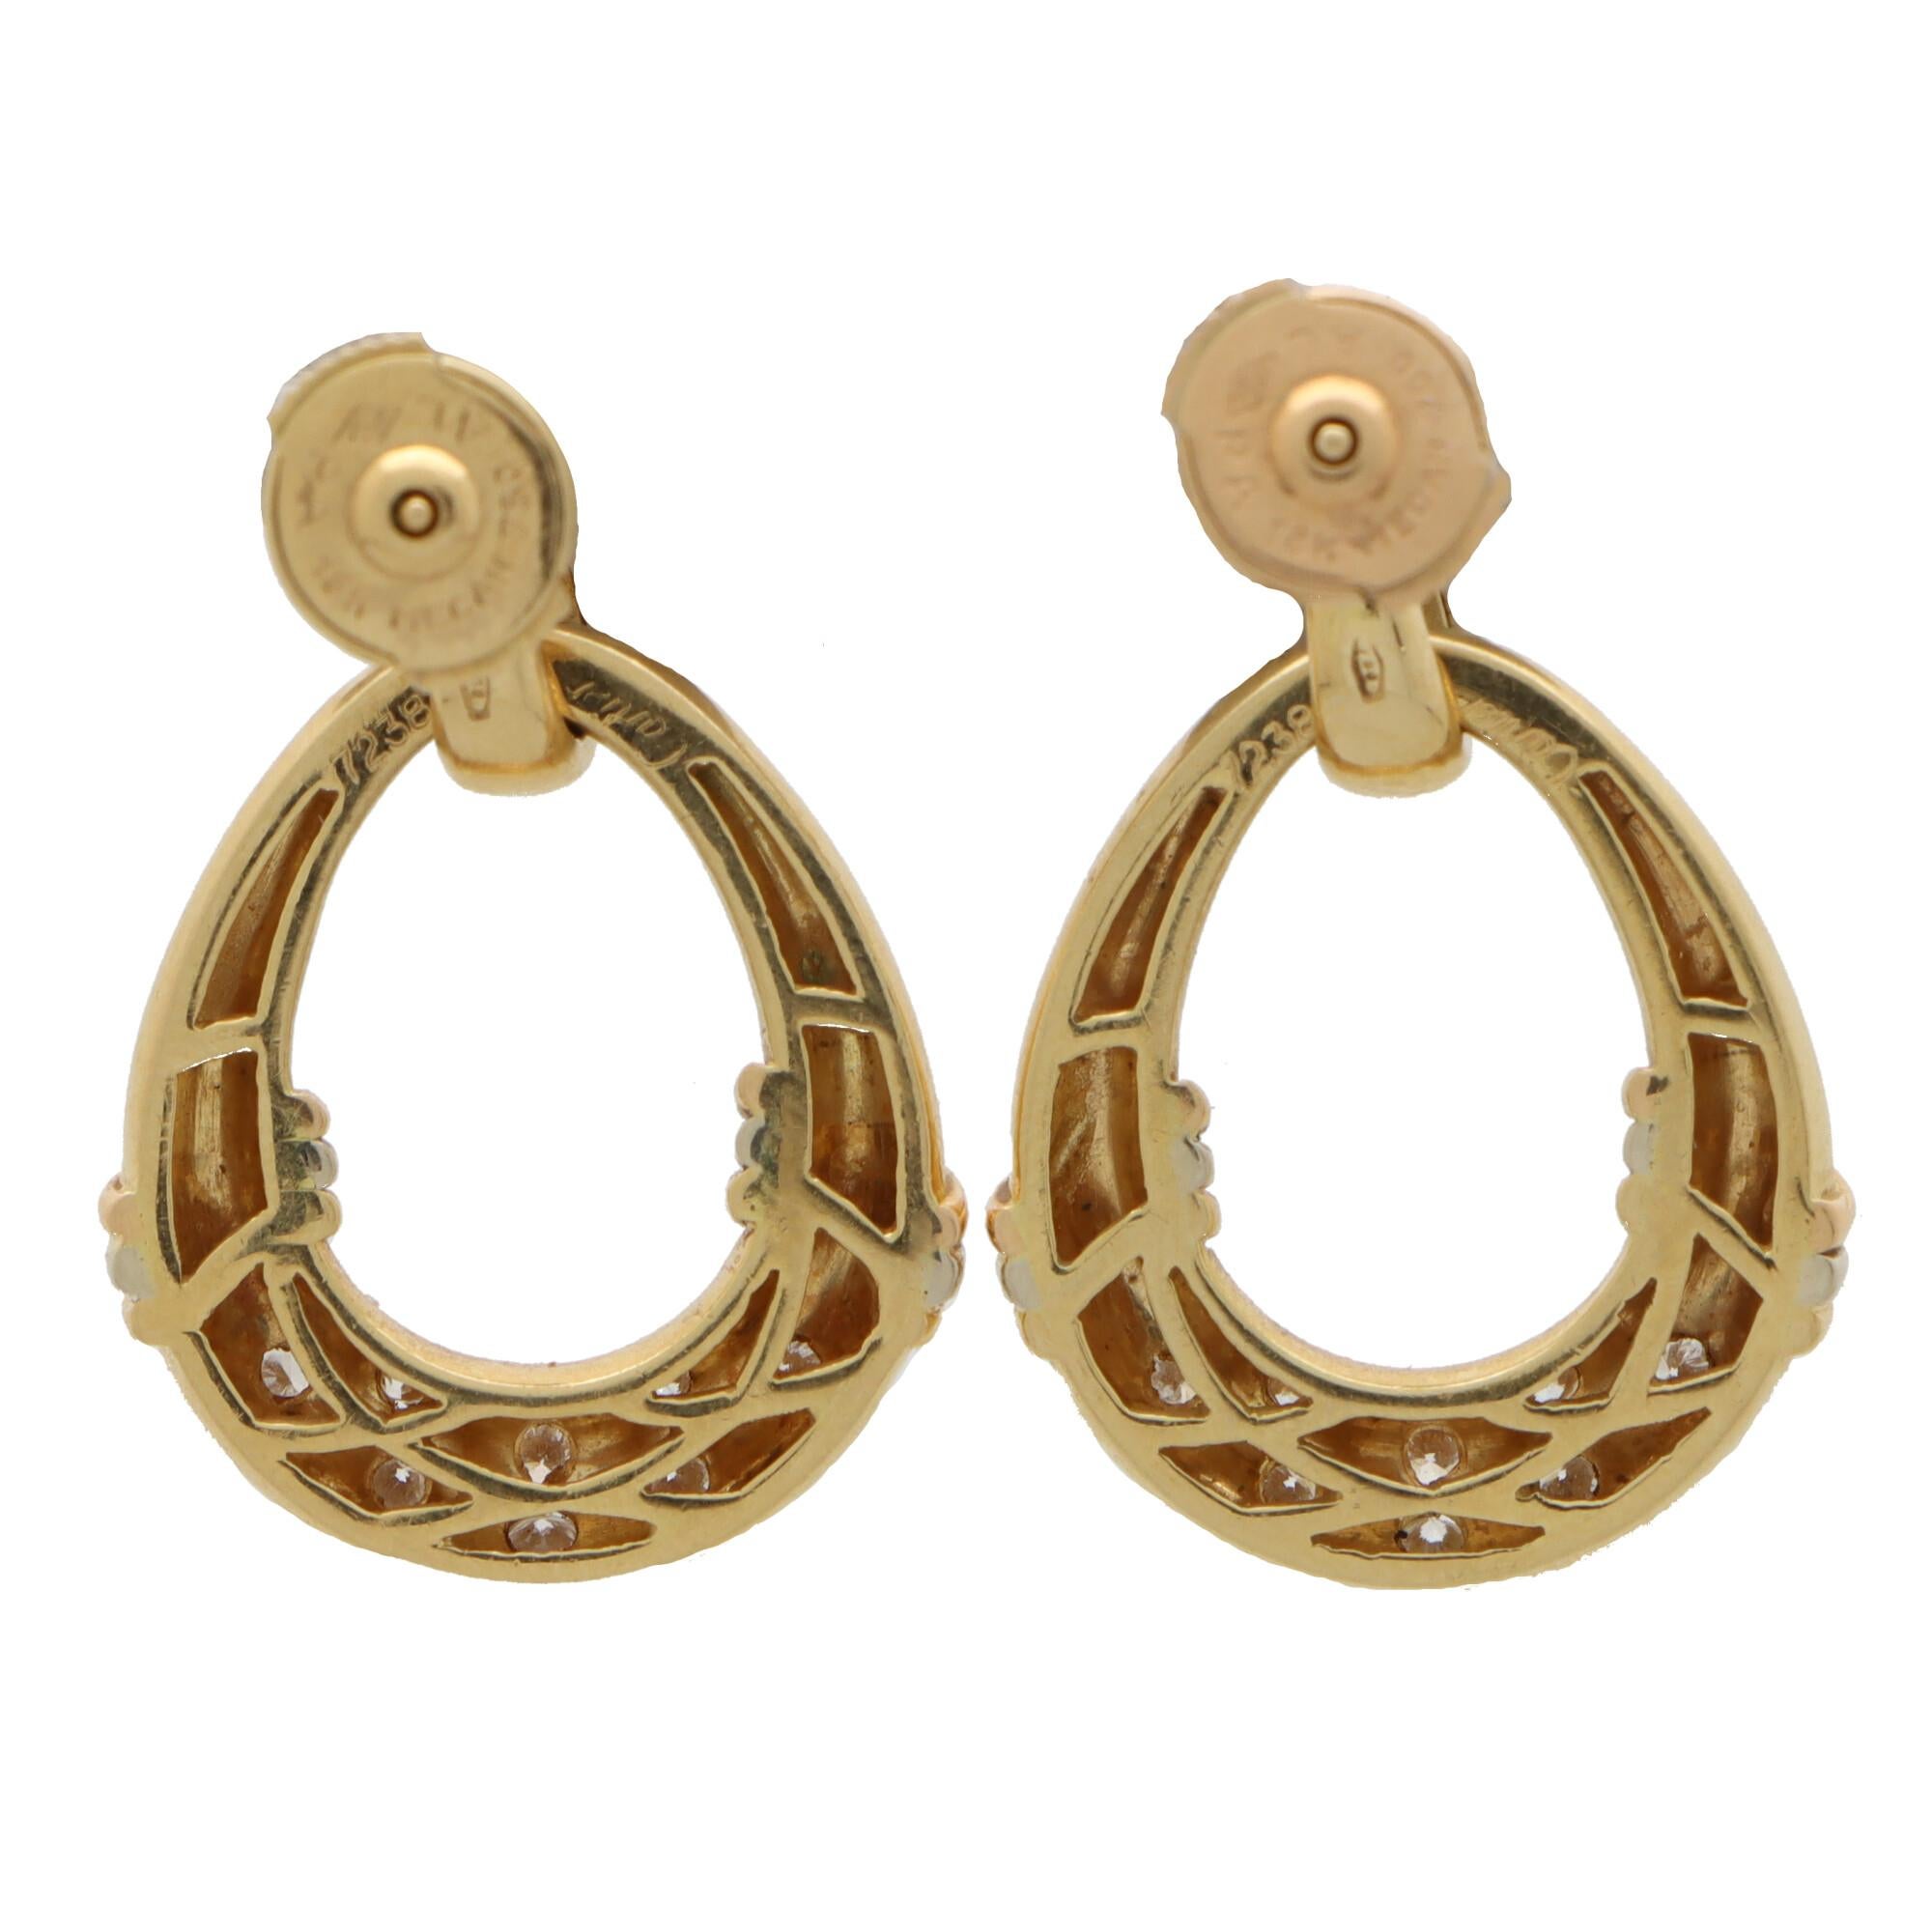  A beautiful vintage pair of Cartier diamond door knocker dangle earrings set in 18k yellow gold.

Each earring is composed of a graduating diamond set bail which hangs a doorknocker hoop. The hoop is set to each side with trinity bands and accented